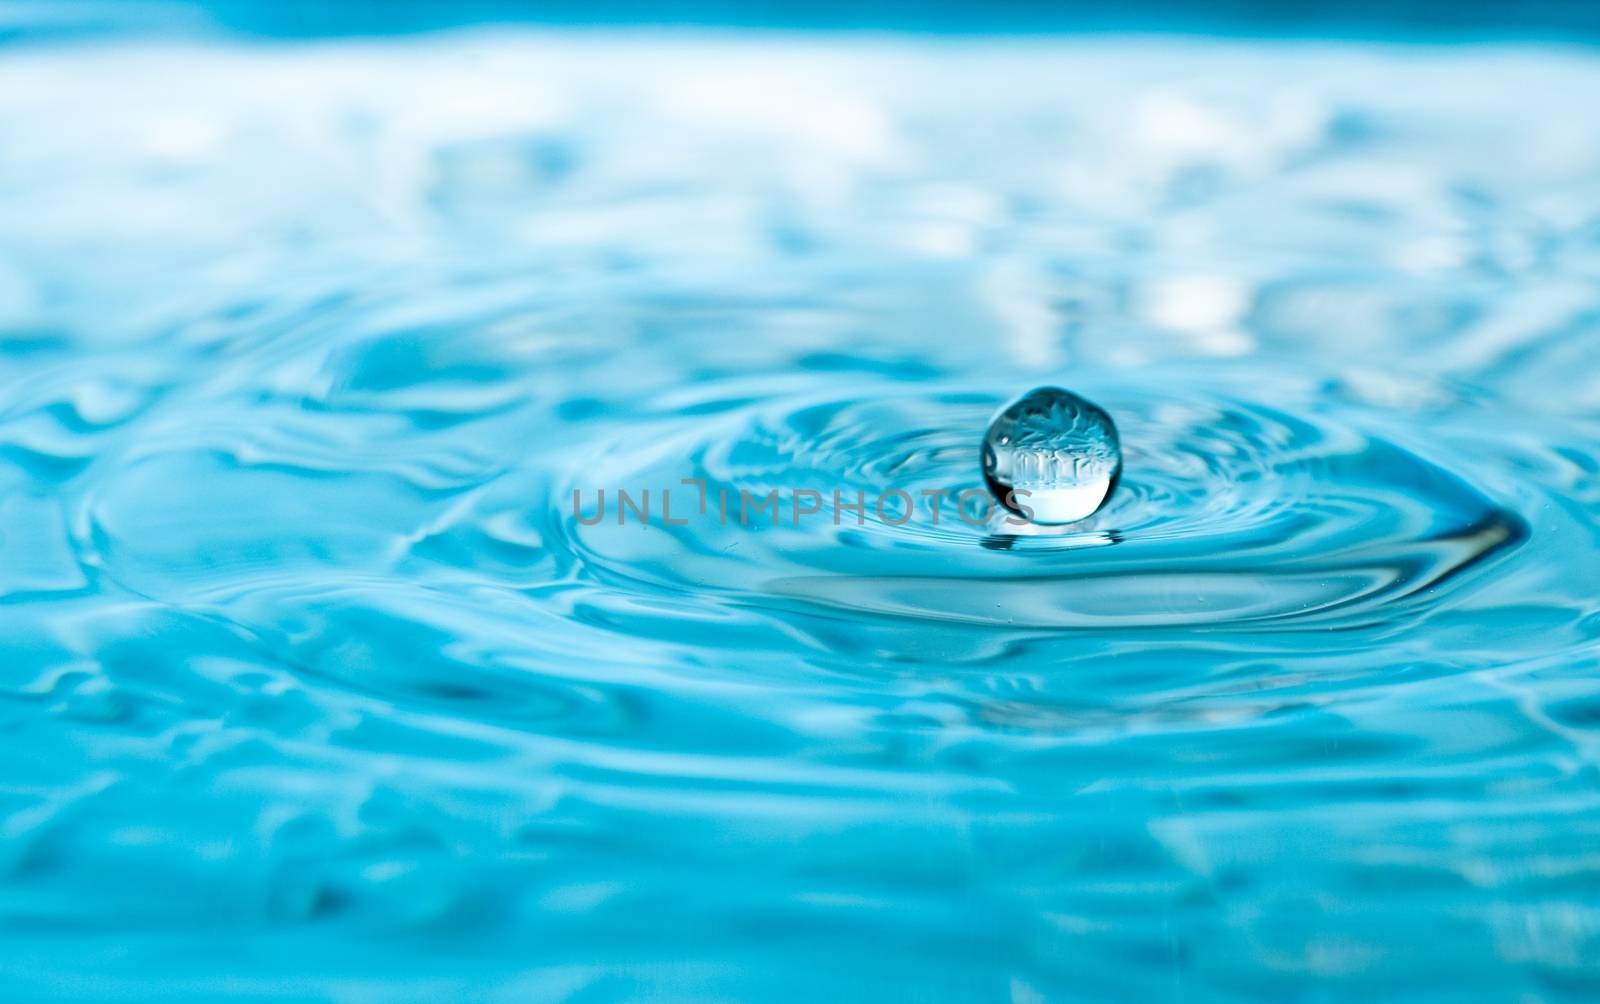 A water drop appears to float on the surface of the water